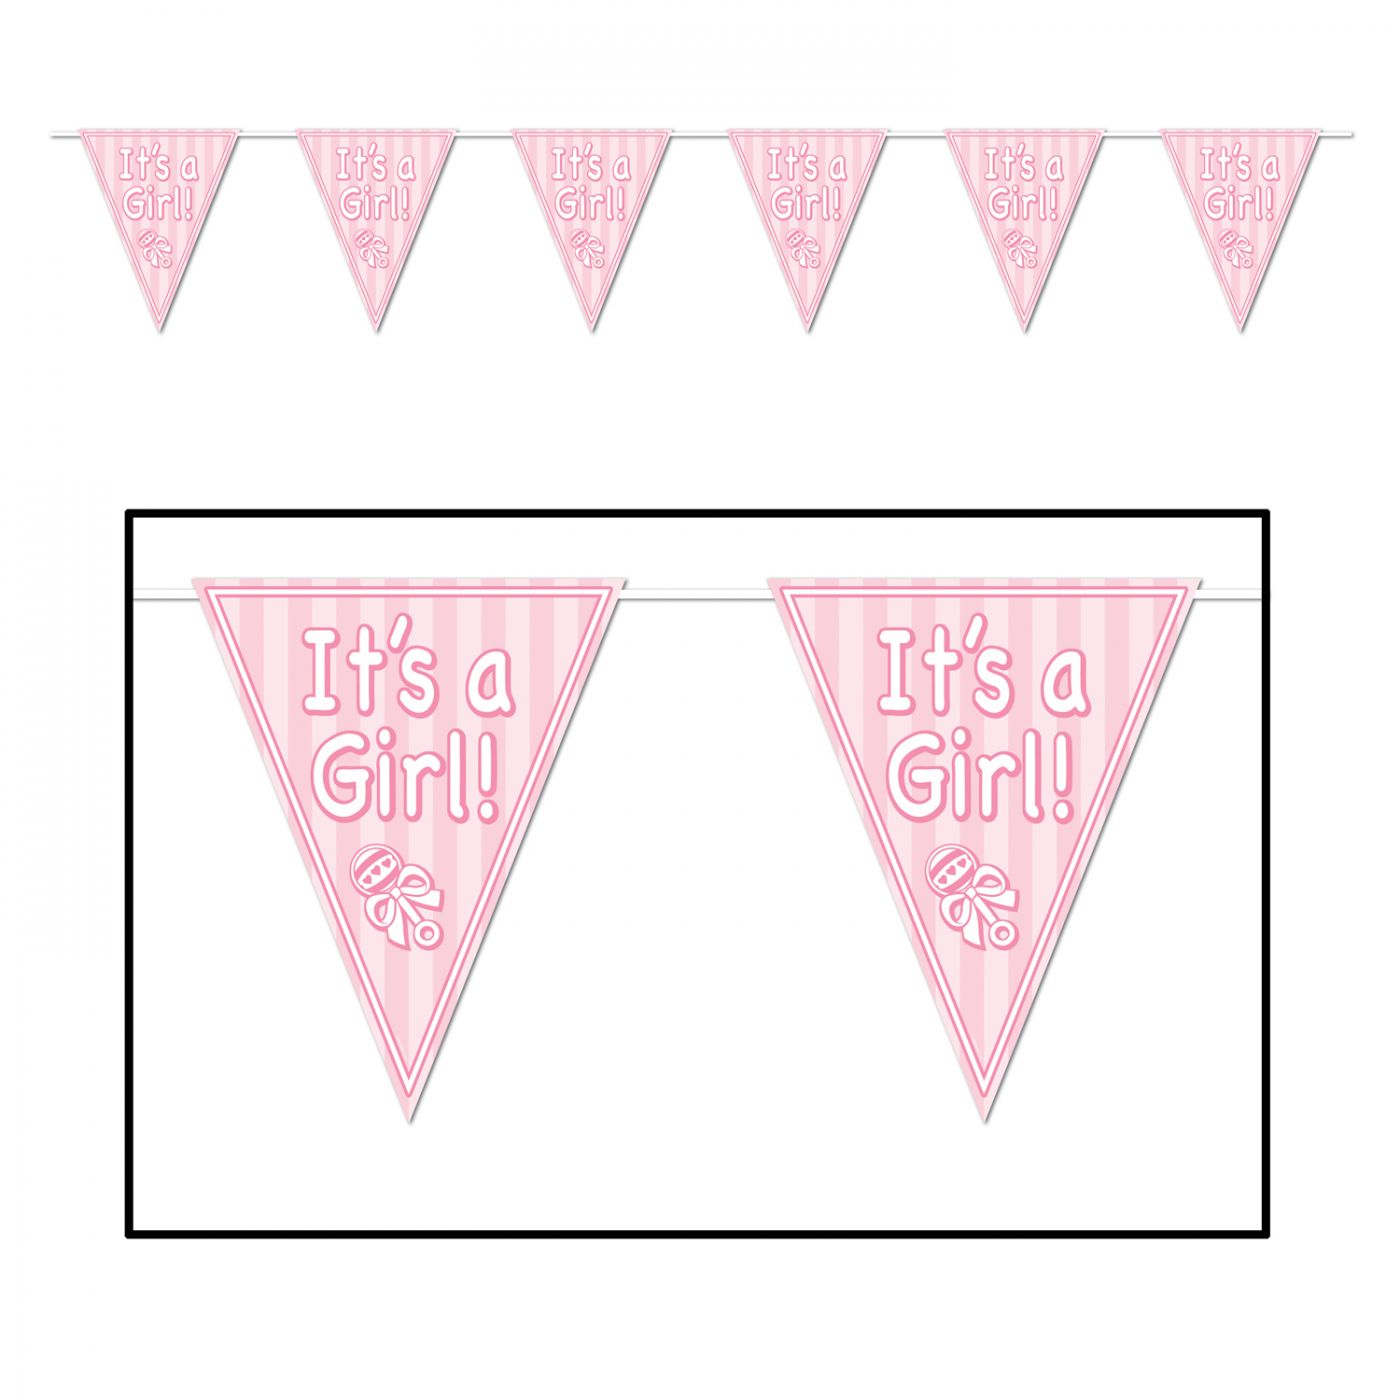 It's A Girl! Pennant Banner (12) image